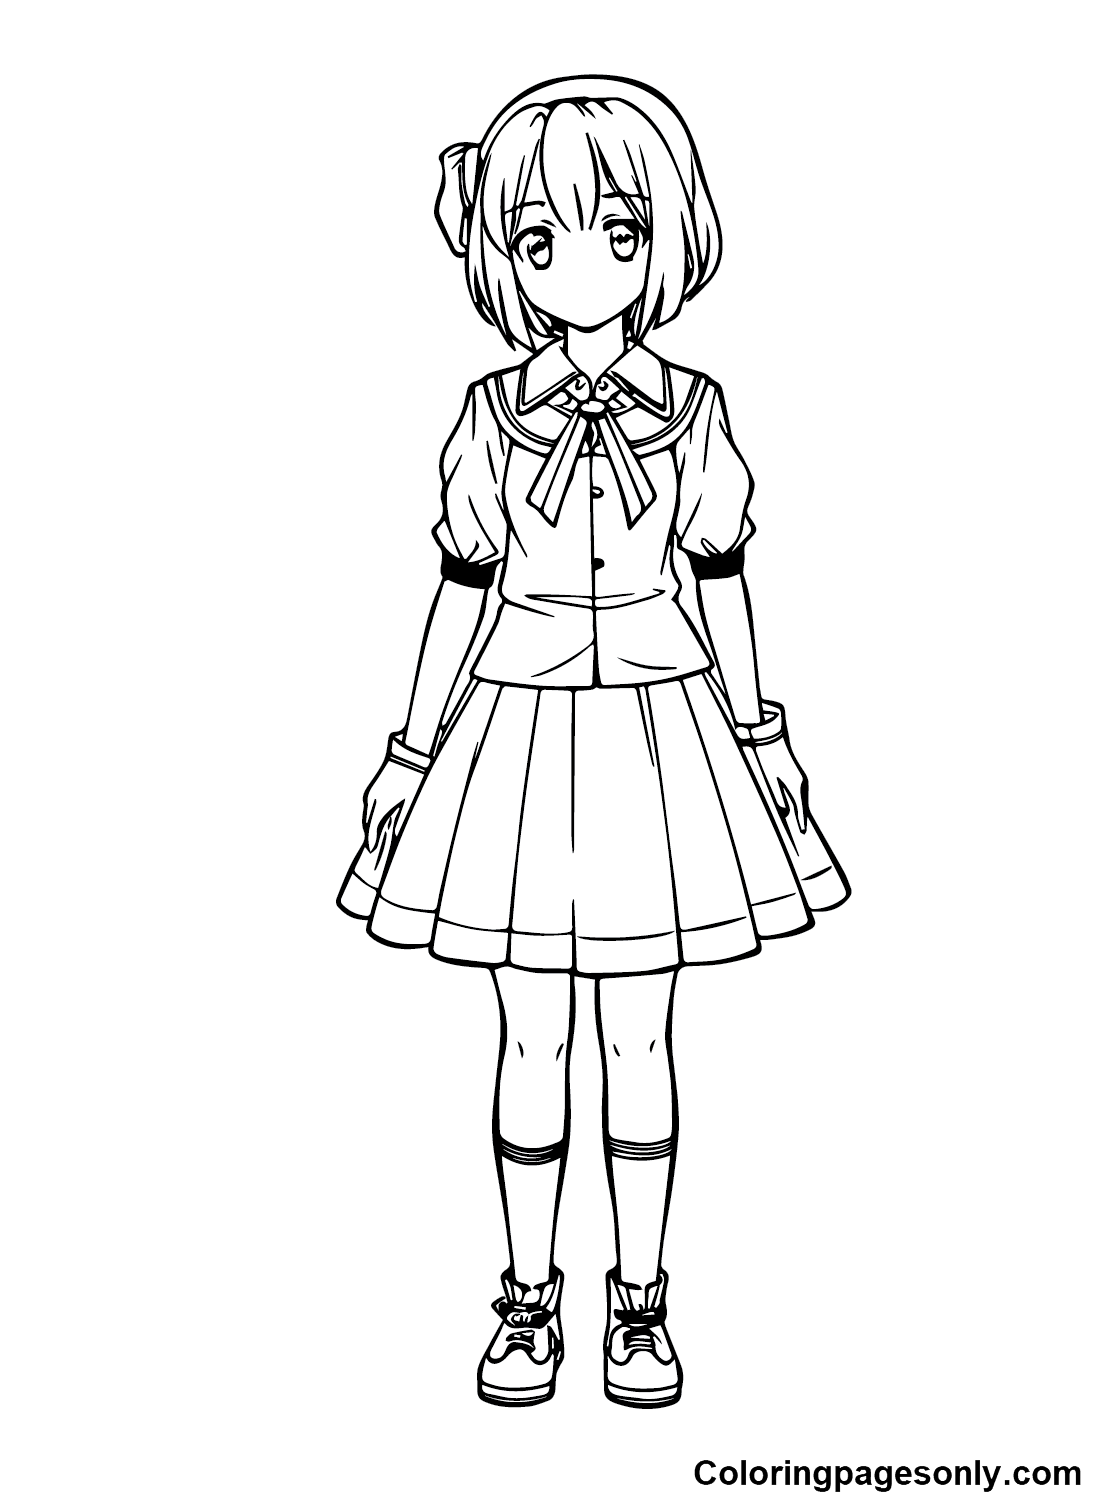 Blue Hair Anime Girl Coloring Page